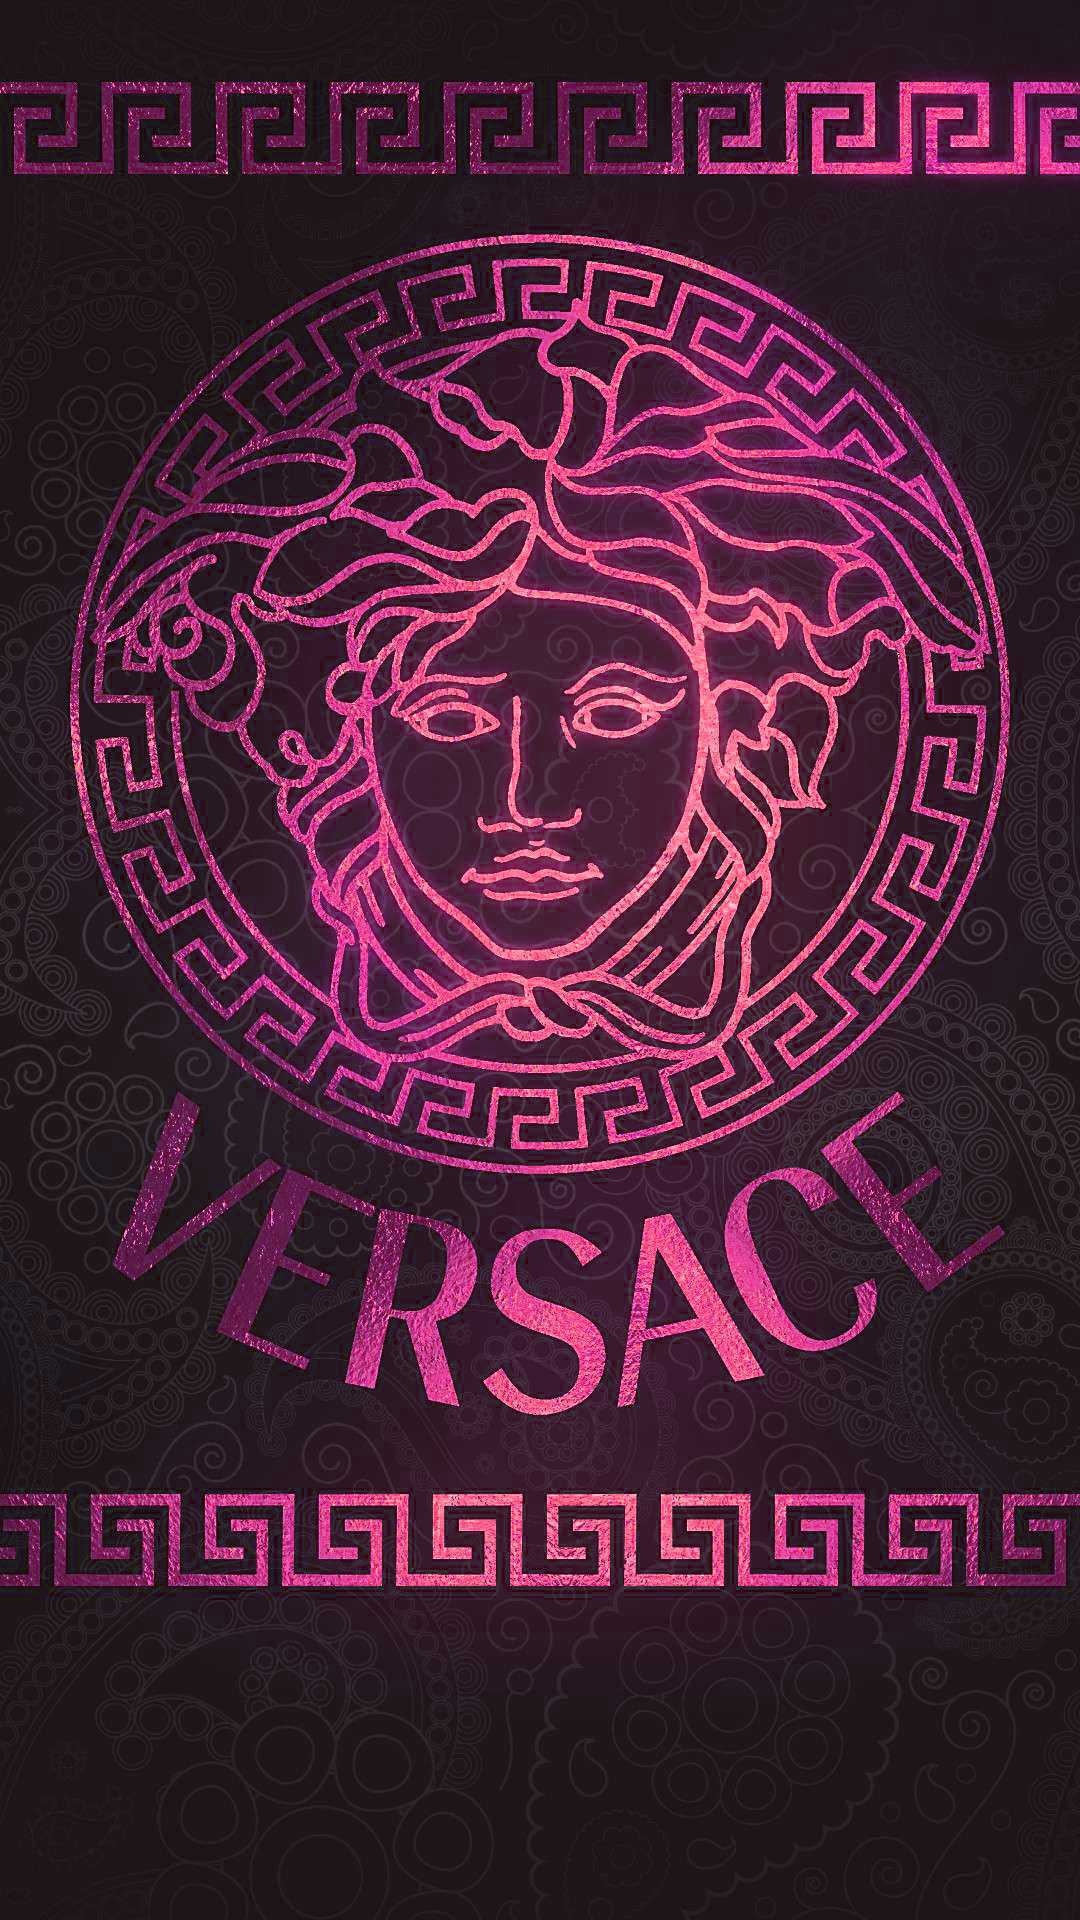 Versace: An Italian fashion label founded in 1978, Neon. 1080x1920 Full HD Wallpaper.